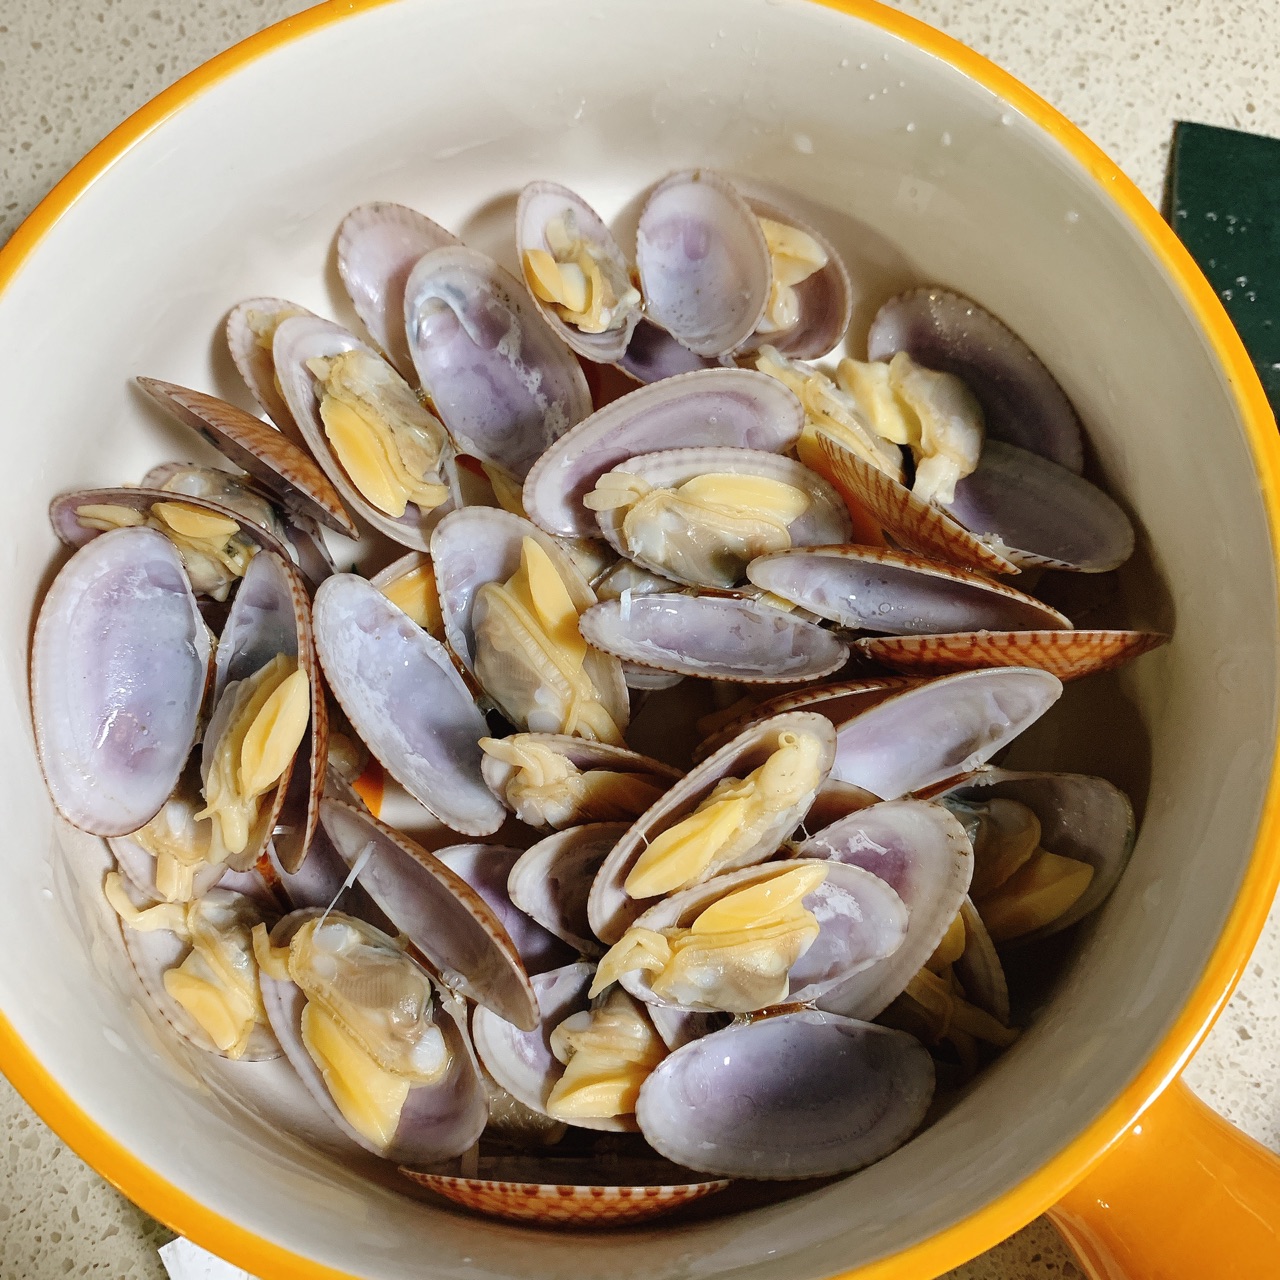 Missta's Kitchen: 花甲蒸水蛋 Chinese Steamed Egg with Clams